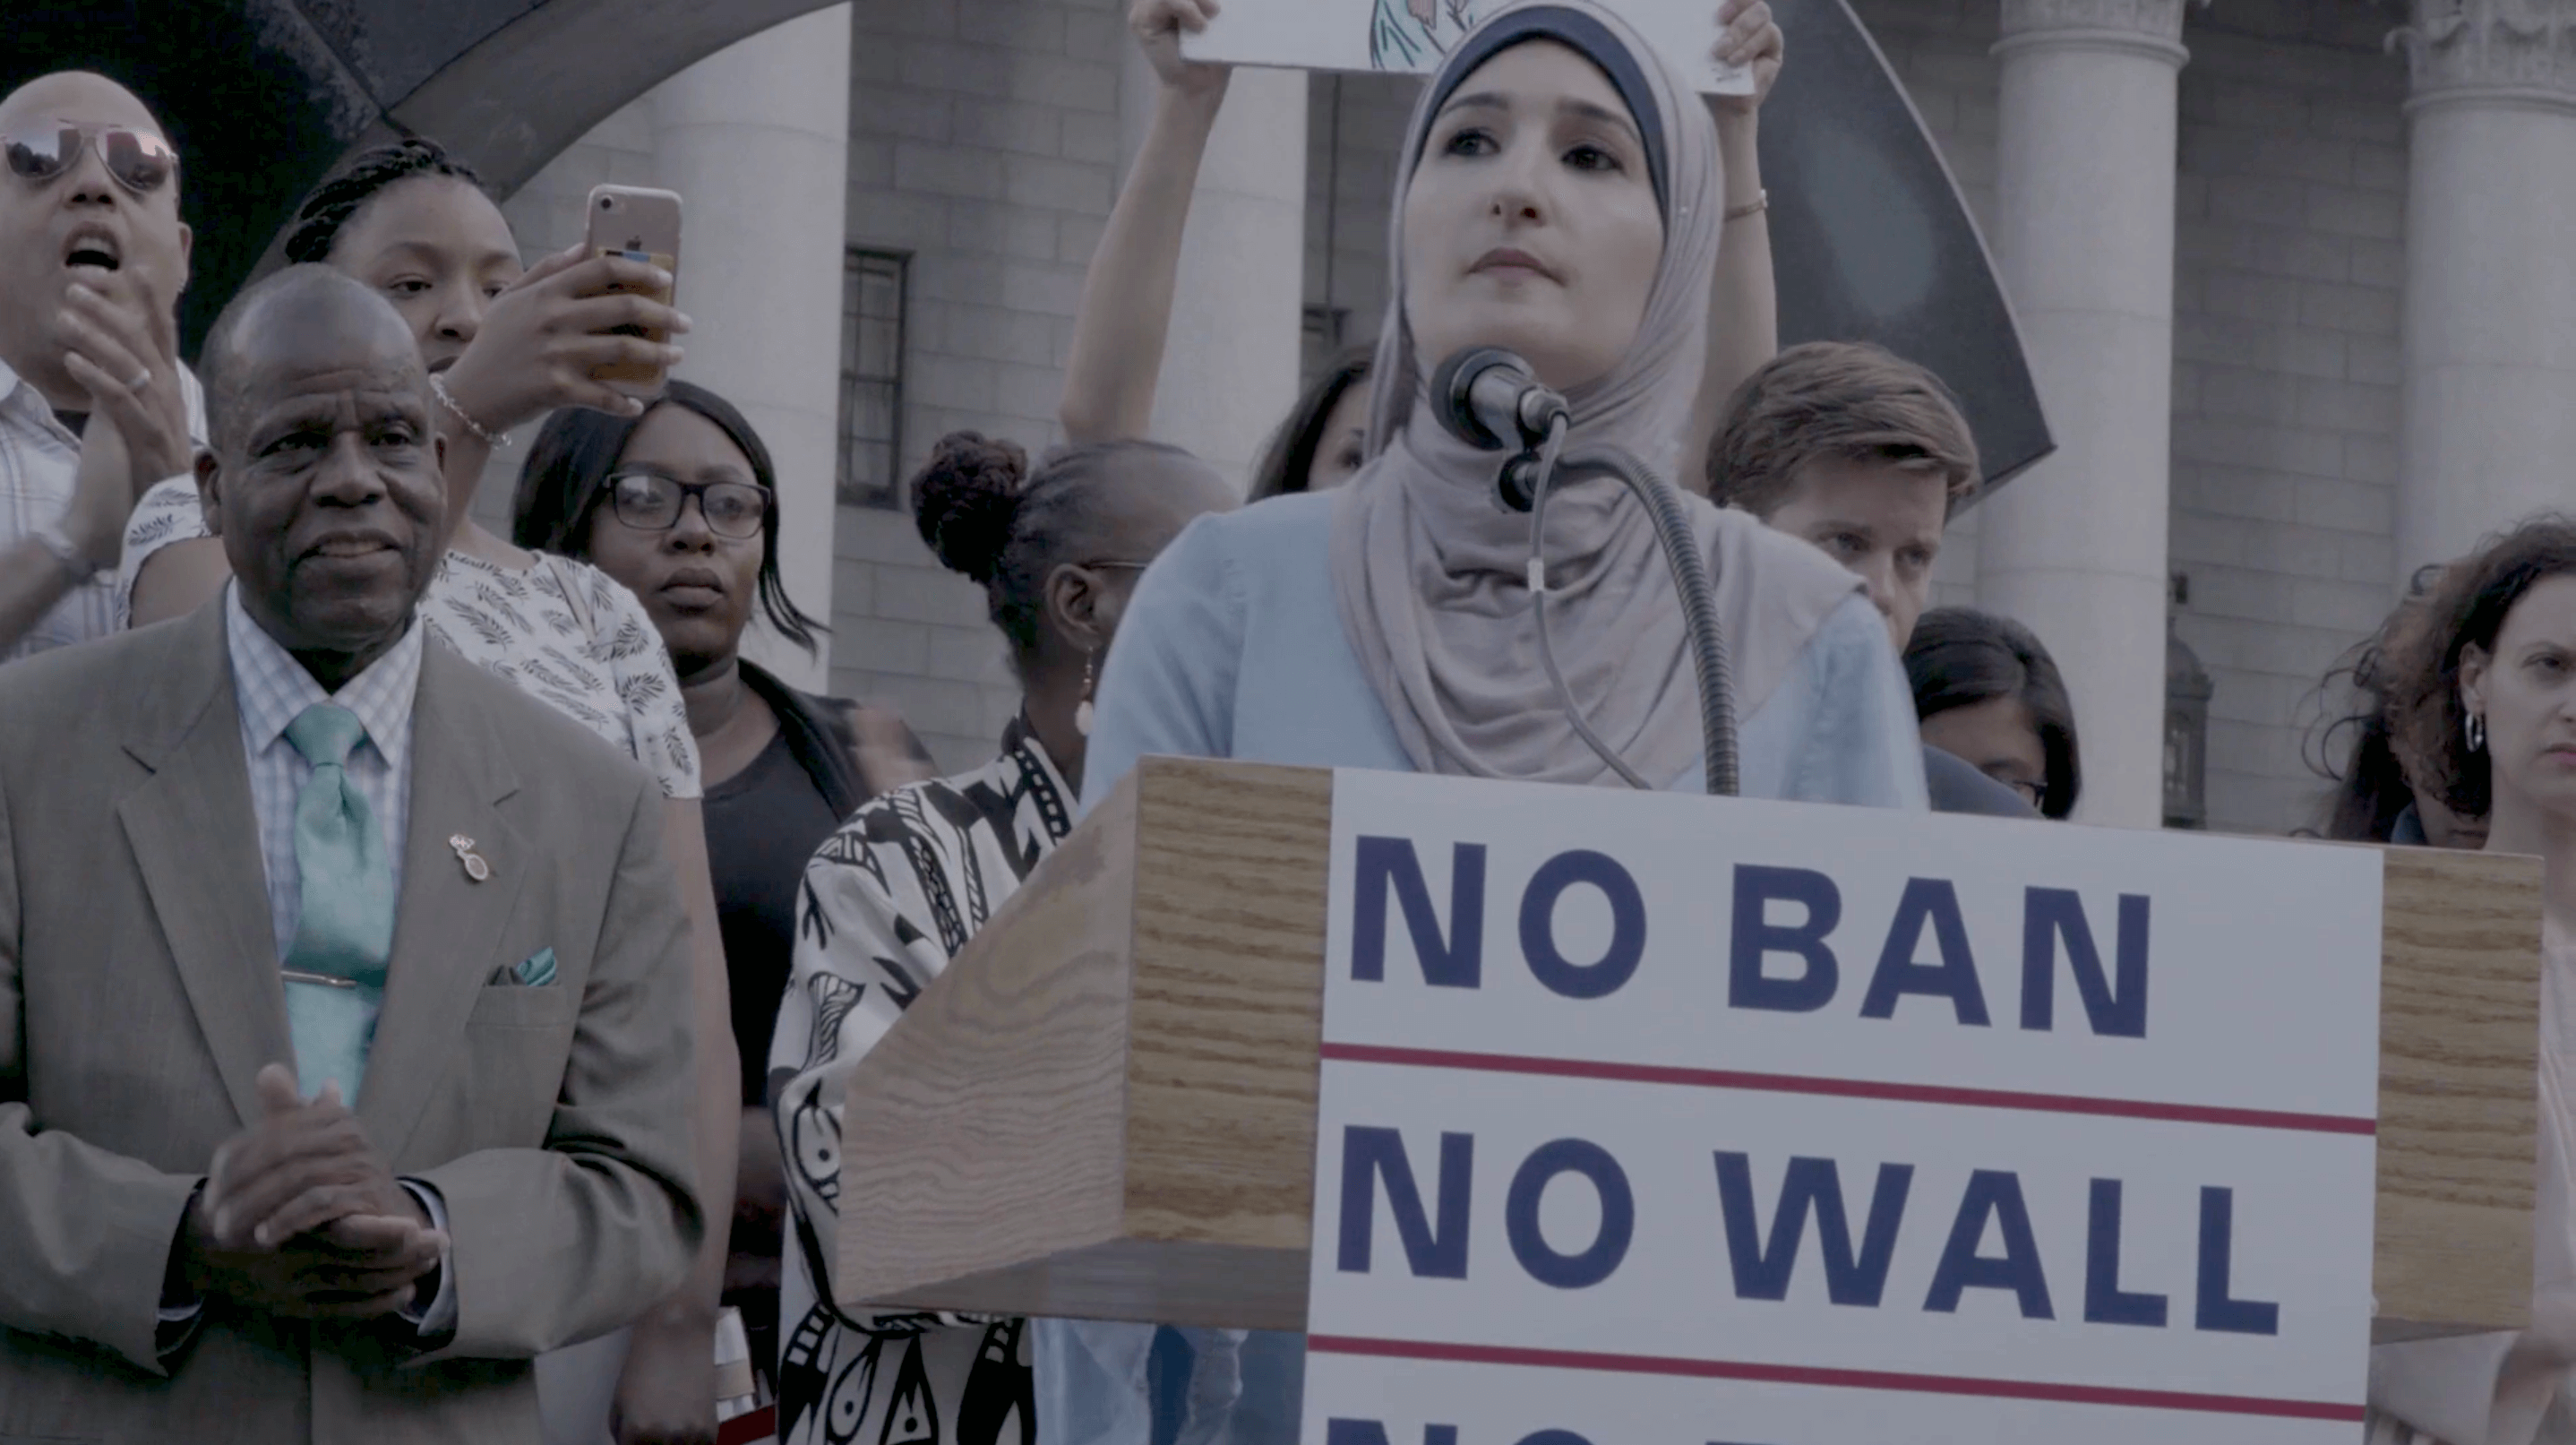 Still from An Act of Worship. A woman wearing a hijab is speaking in front of a podium, the podium has a poster that says "no ban, no wall." Behind her, there is a group of people.